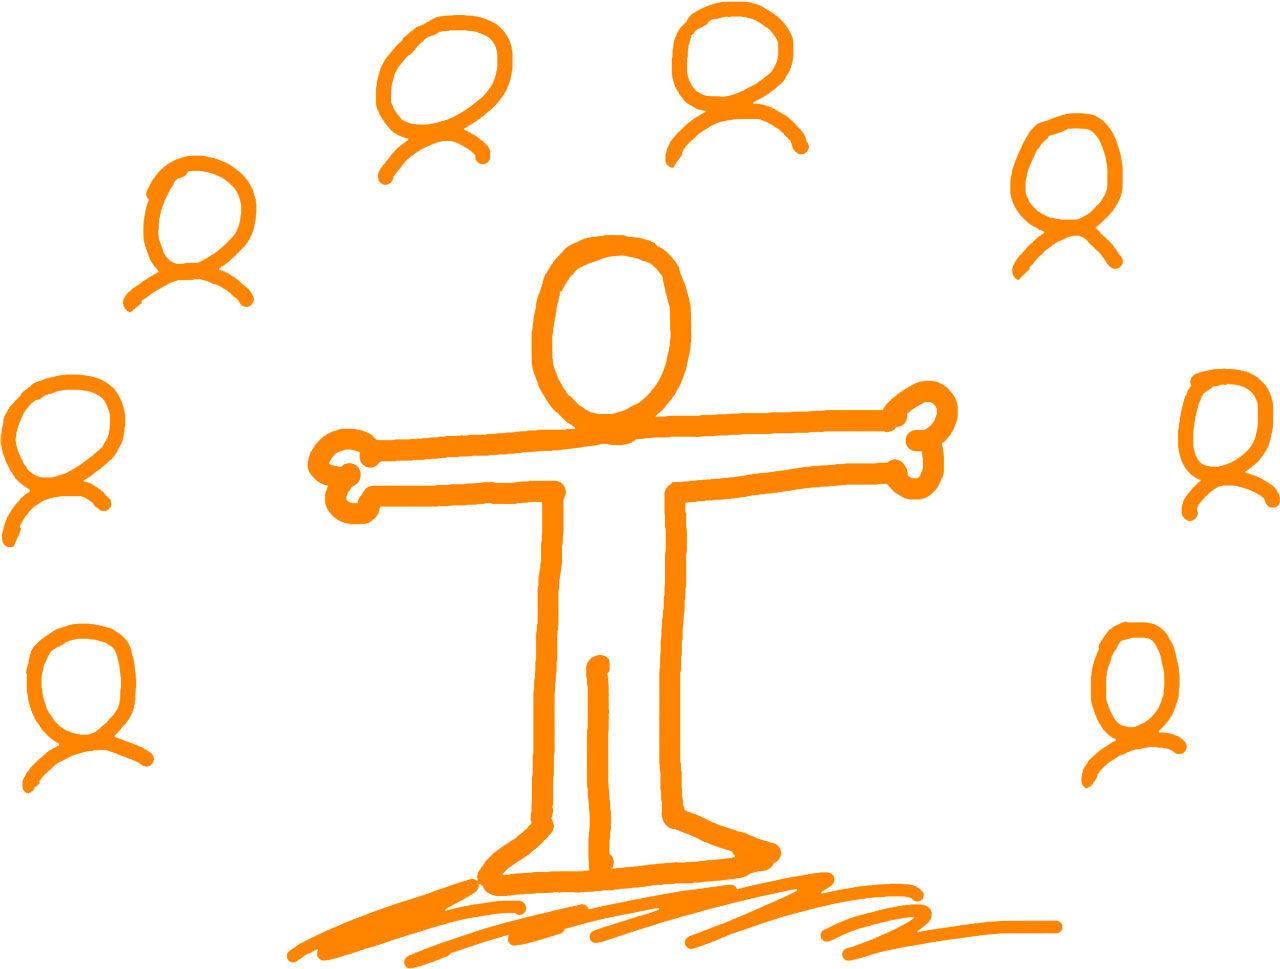 An illustration of a leader surrounded by a group of people, symbolizing authority, influence, and guidance. The leader is positioned centrally, exuding confidence and commanding attention, while the surrounding individuals look towards them, indicating respect and reliance on their leadership.